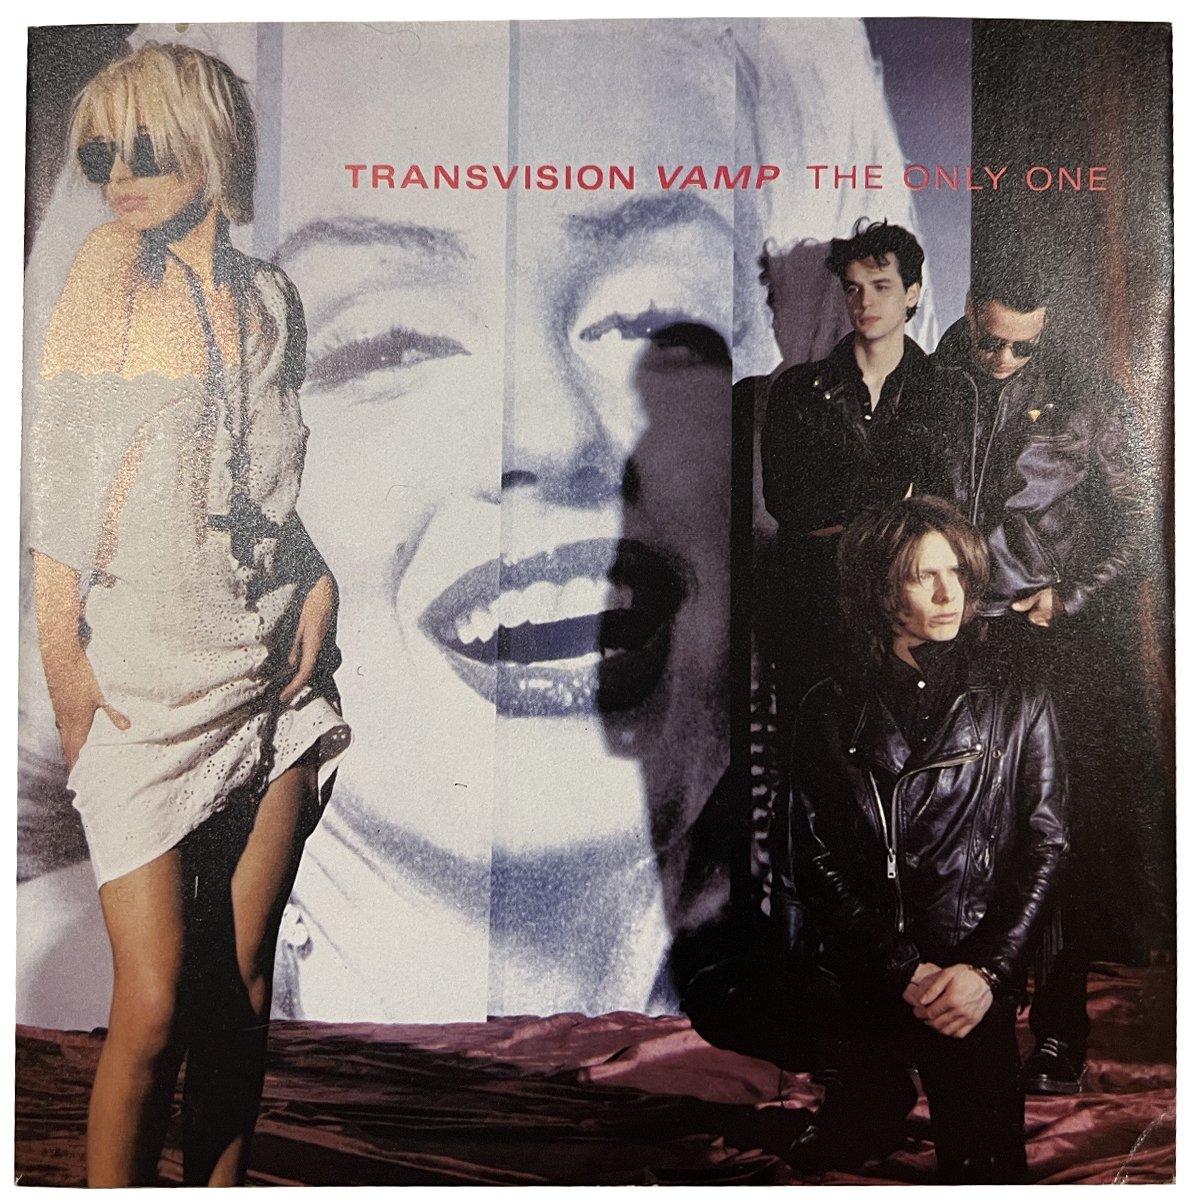 TRANSVISION VAMP ‘THE ONLY ONE’ 7” VINYL 1989